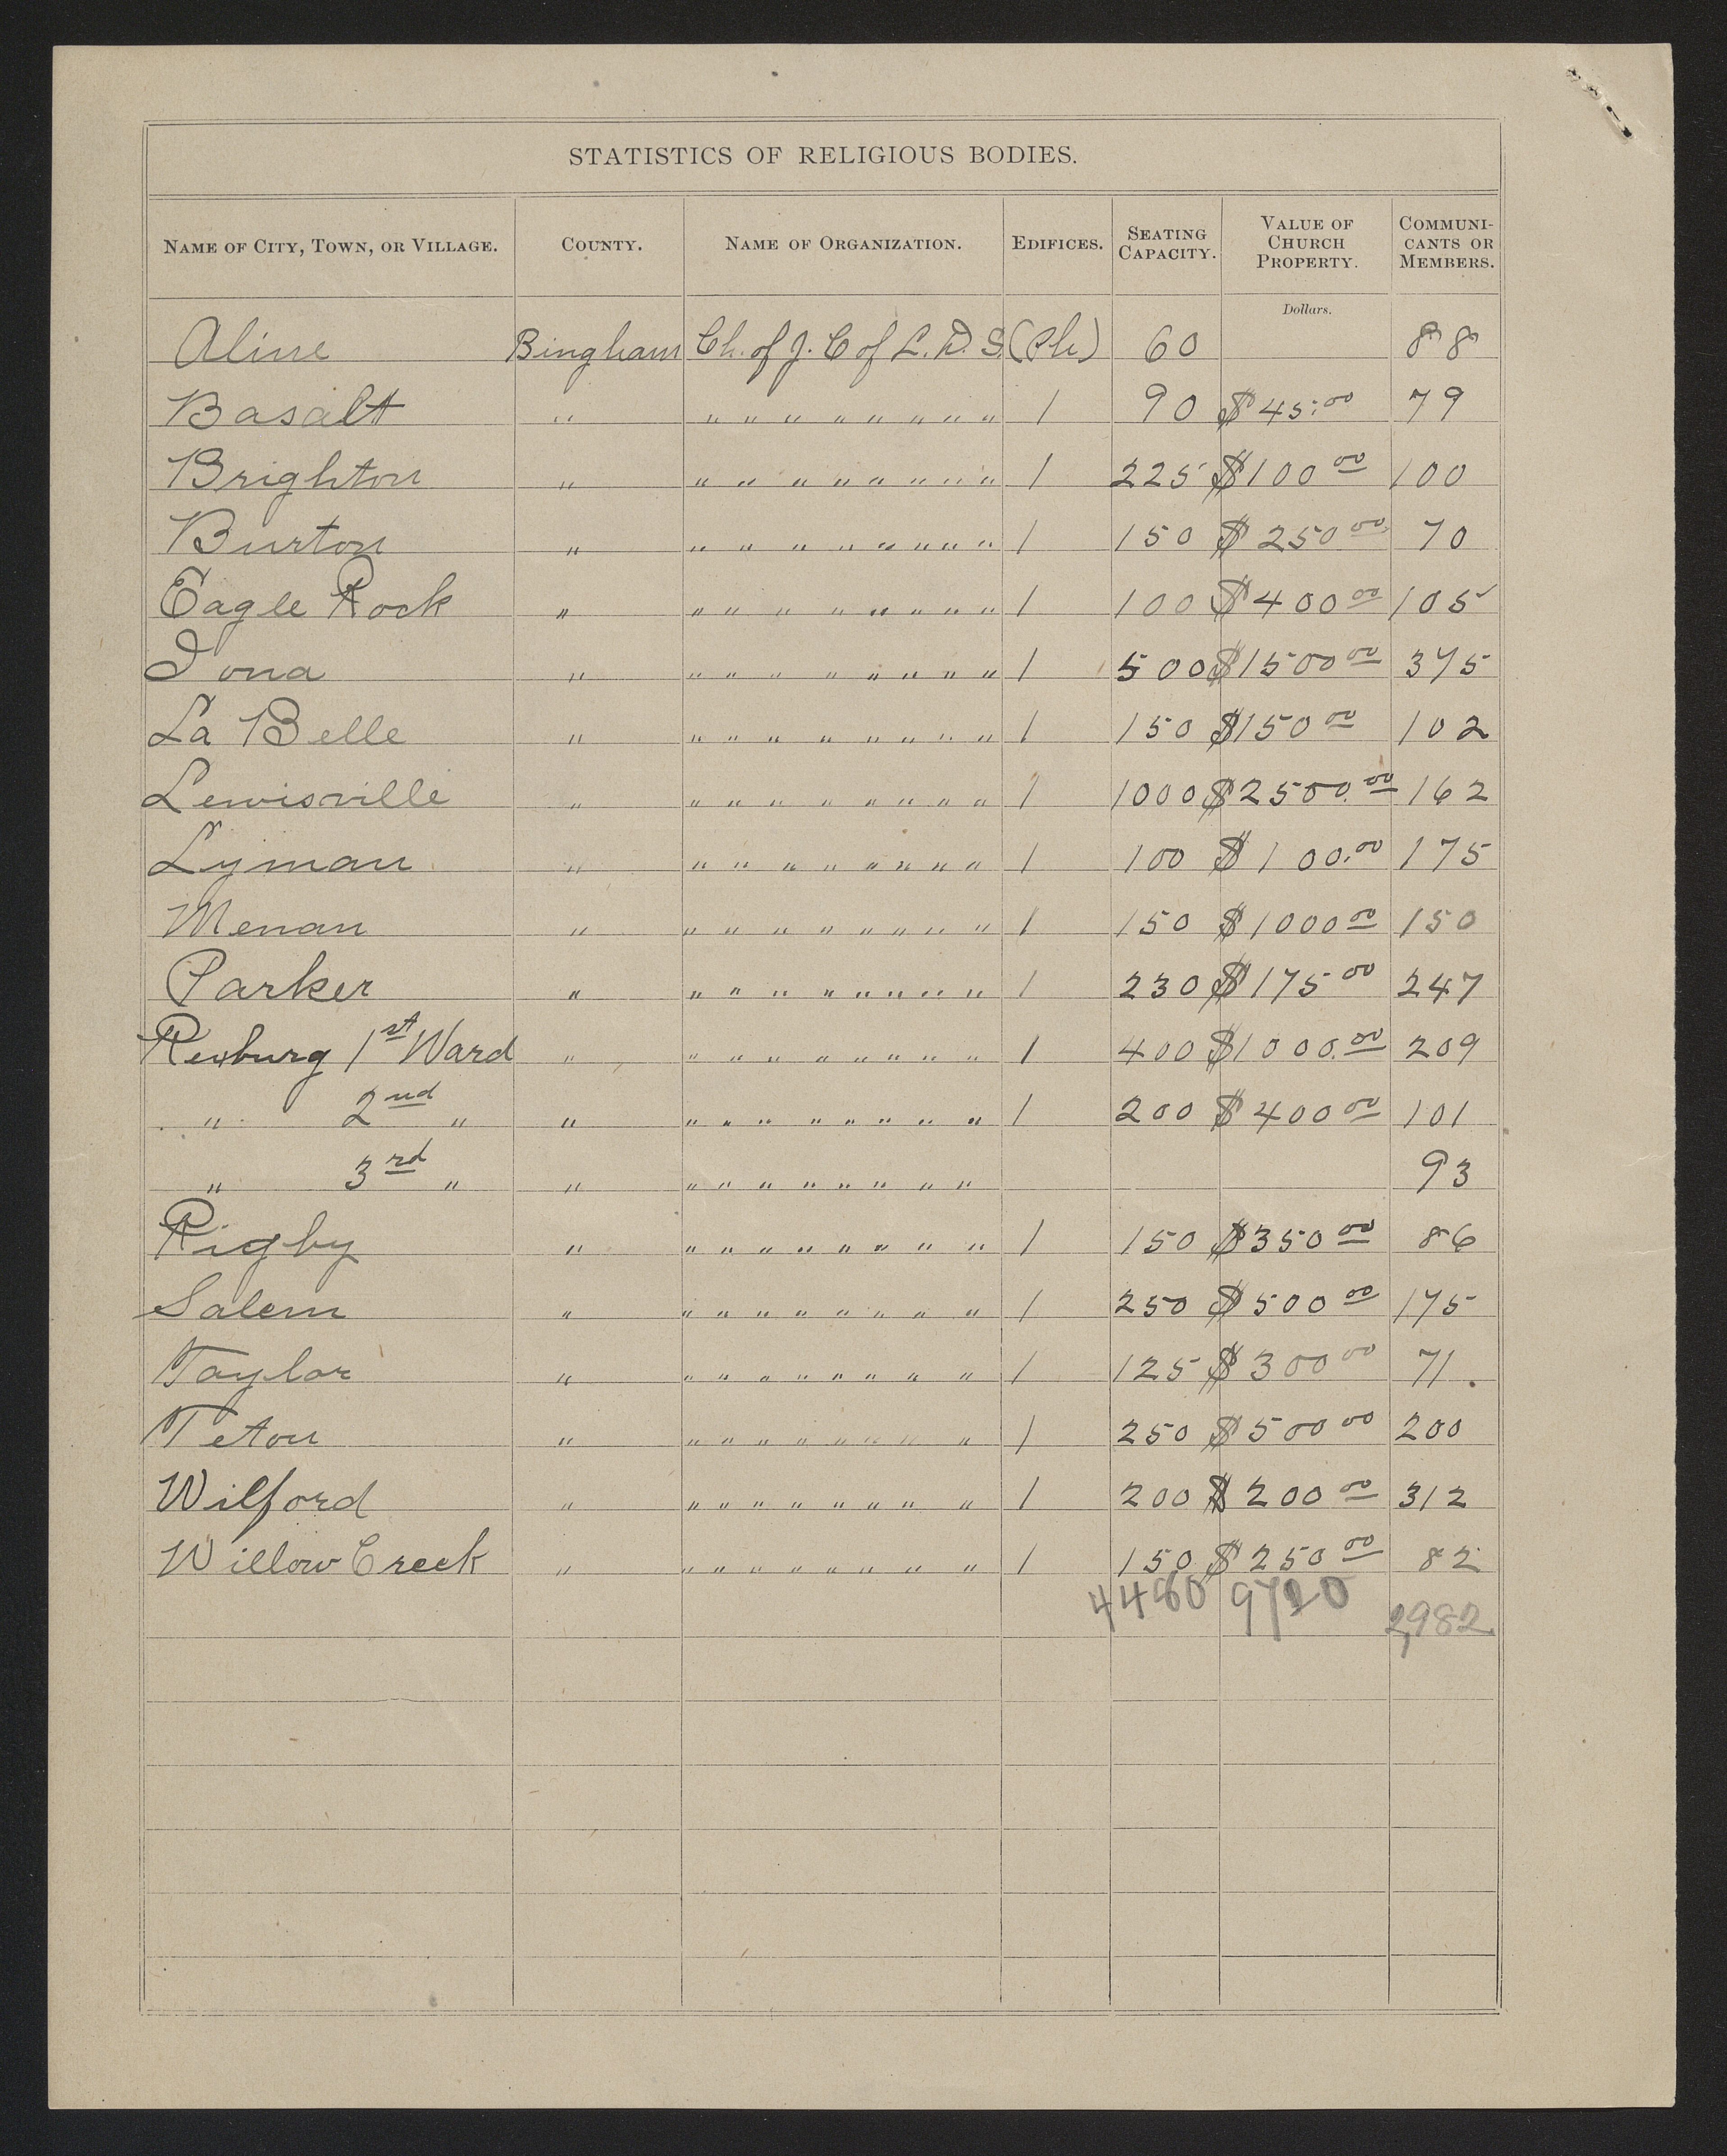 Figure 4. Schedule for the Bannock Stake of the Church of Jesus Christ of Latter-day Saints in the 1890 Census. CR 4 98, Church History Library, Salt Lake City, Utah.